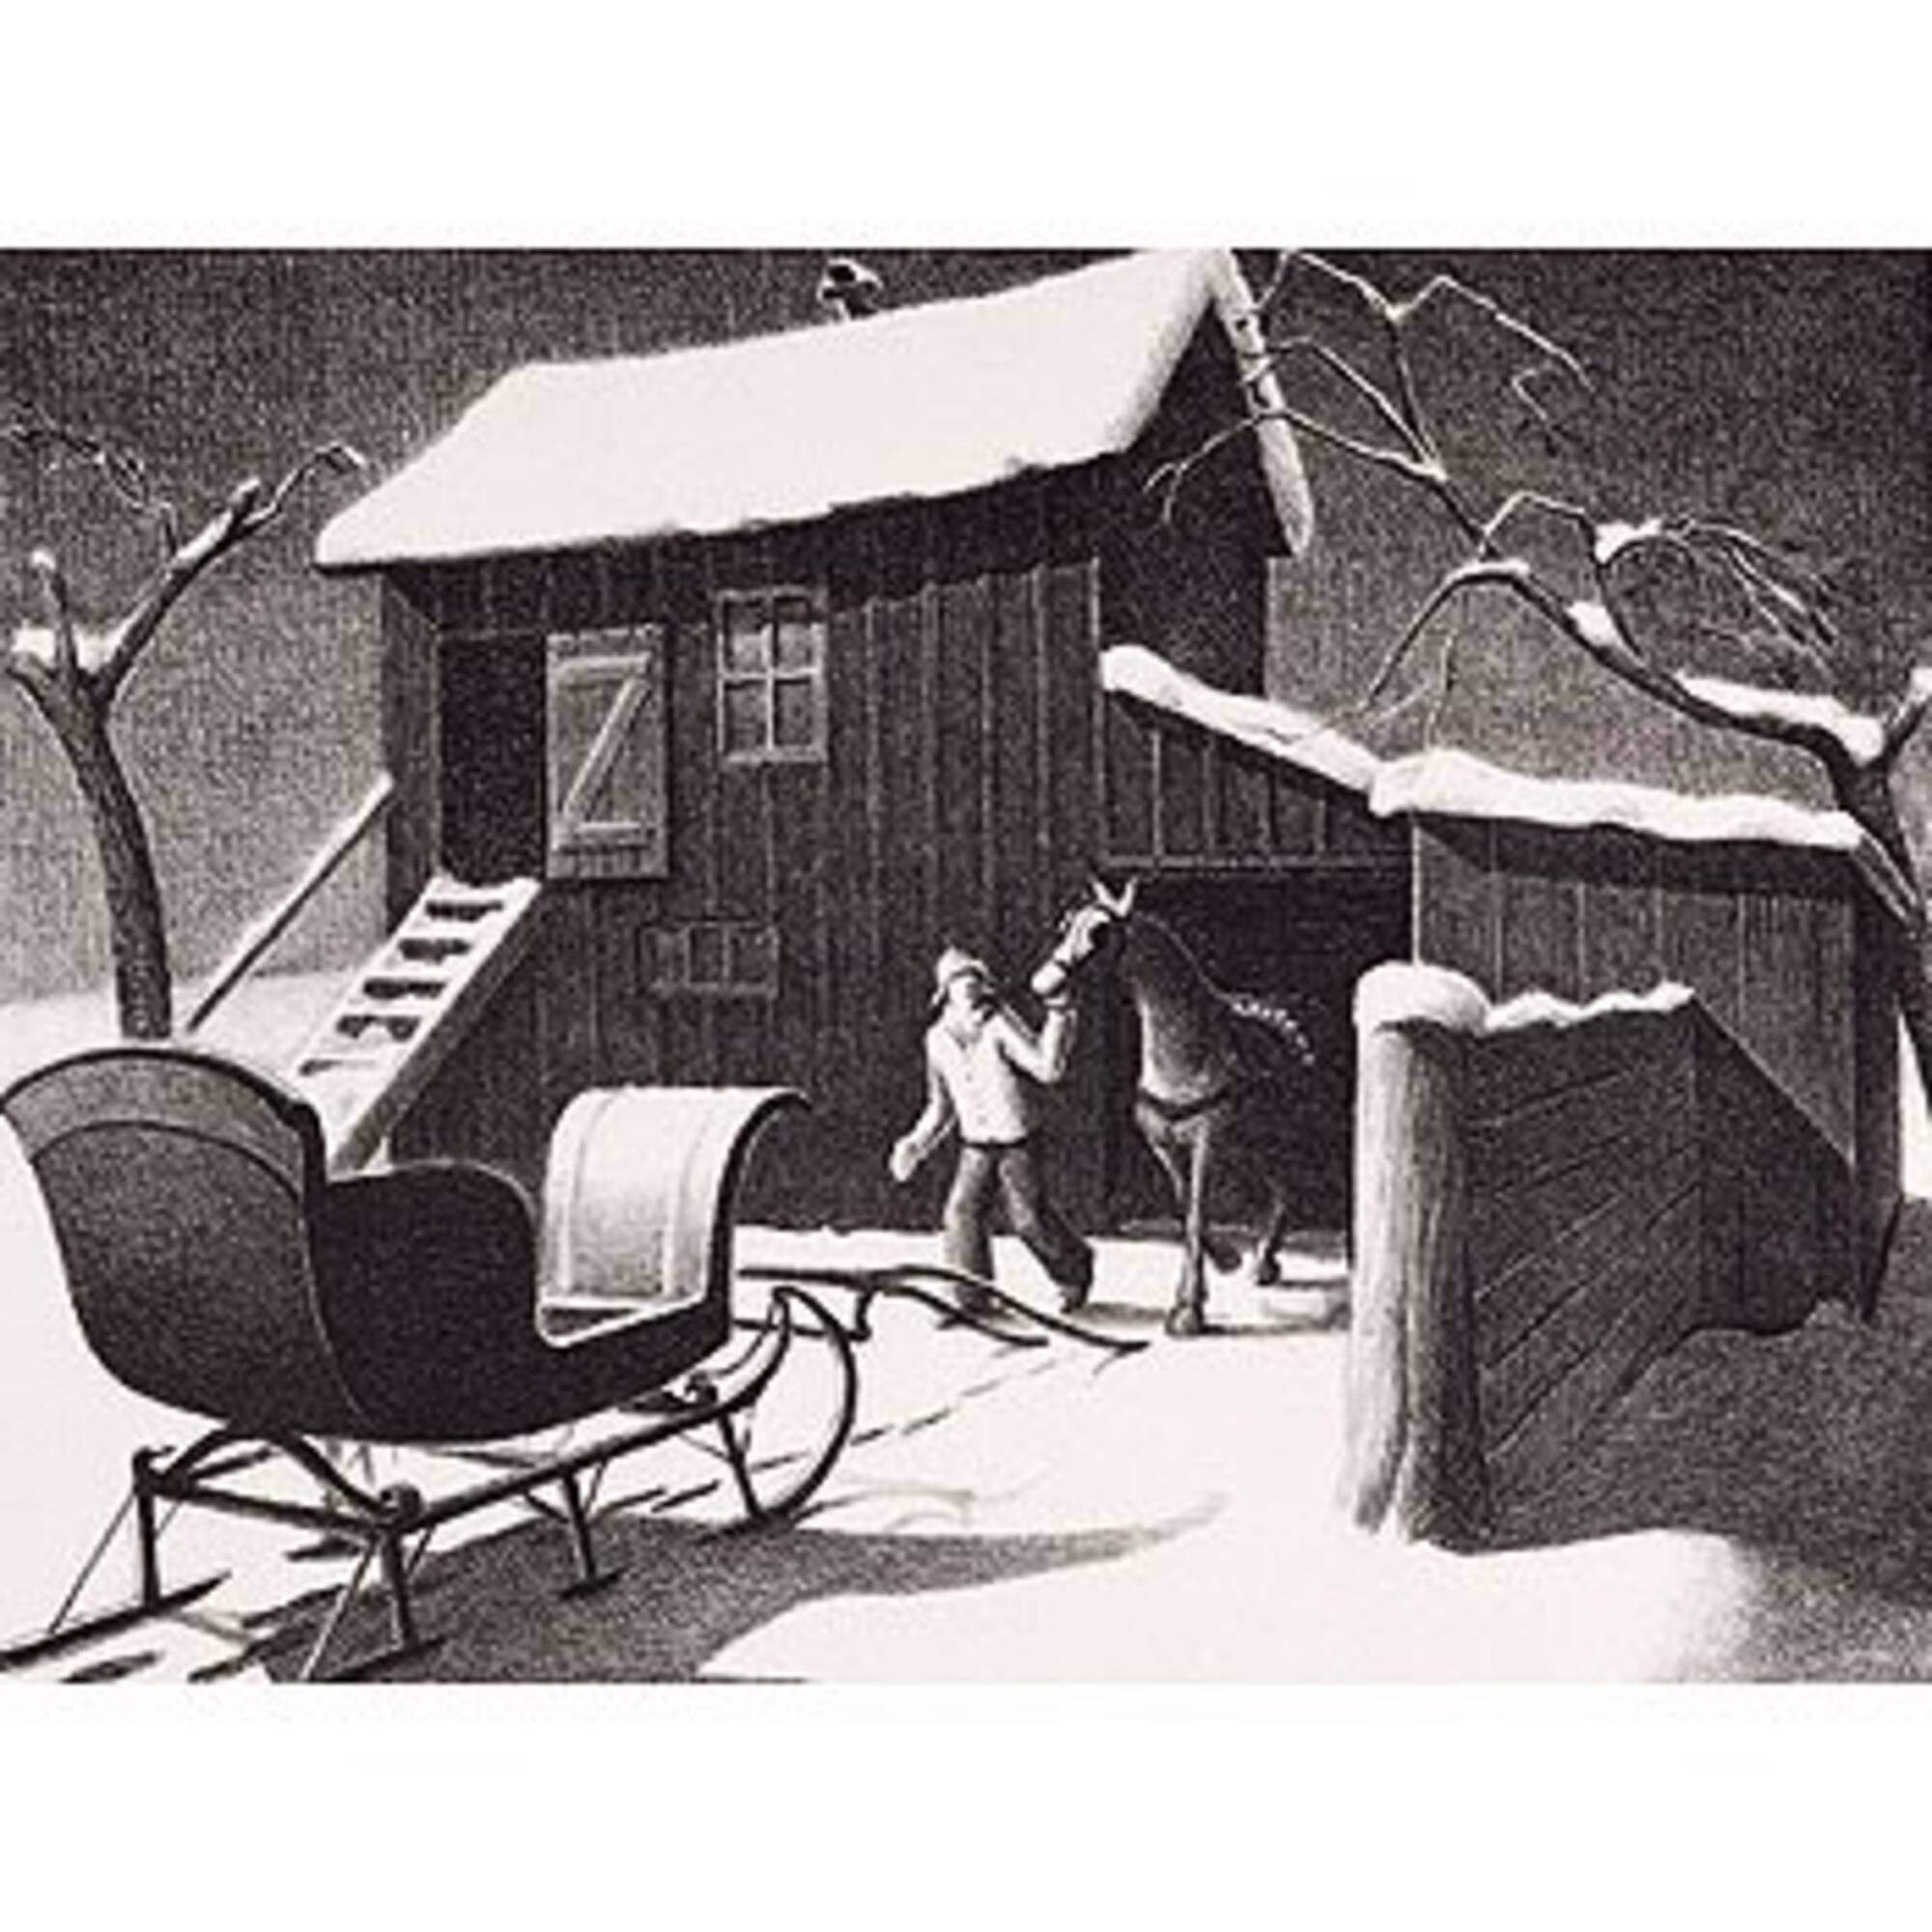 151: GRANT WOOD, December Afternoon < The American Scene: Art of